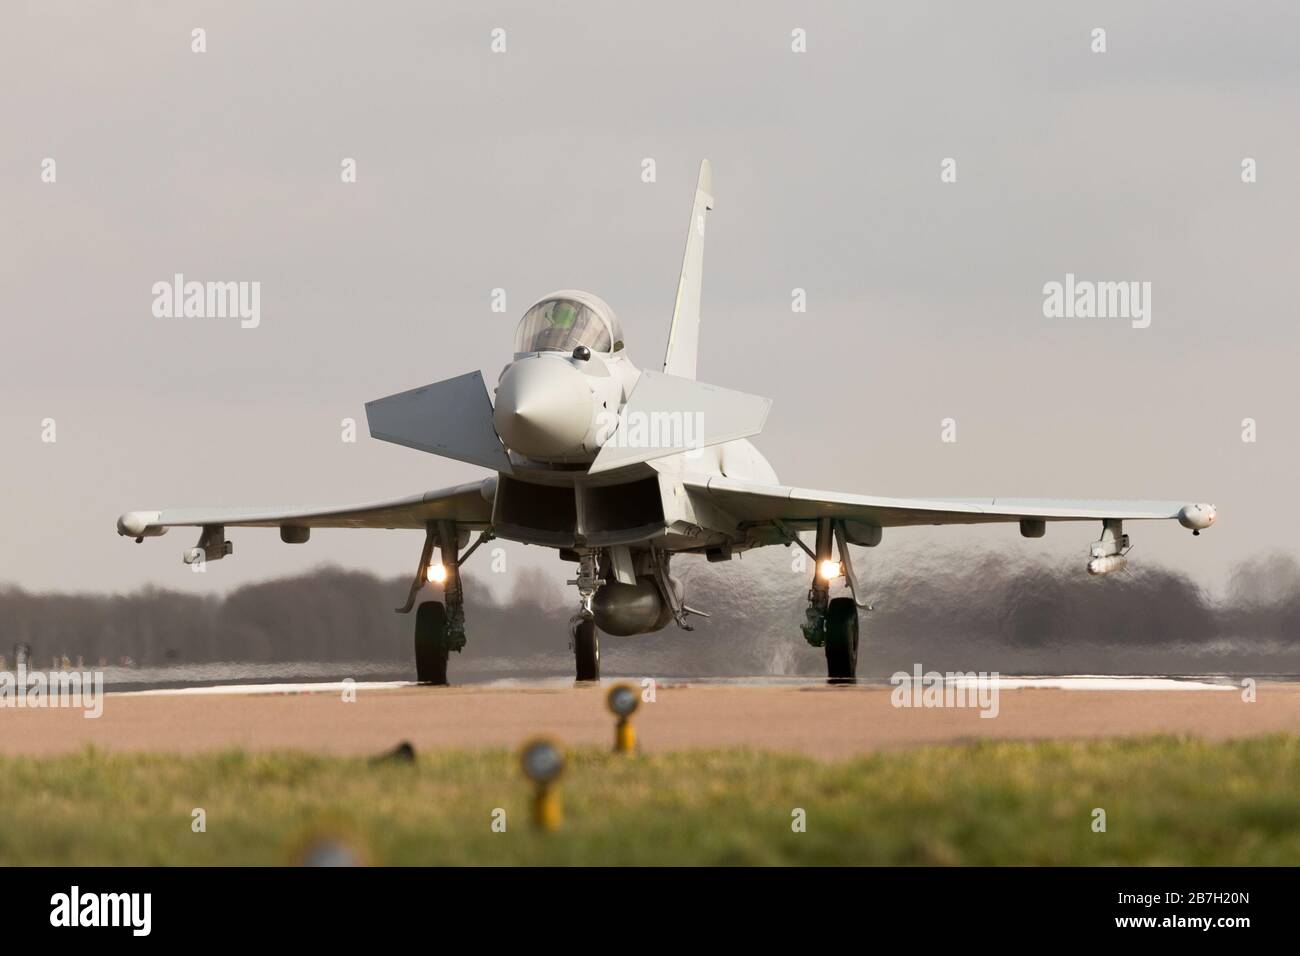 RAF Coningsby, Lincolnshire, UK. 16th Mar, 2020. Typhoon aircraft of 29 squadron on practice flights from Royal Air Force Coningsby, Lincolnshire. RAF airshows later in the year are under threat of postponement or cancellation due to the COVID-19 pandemic. Credit: Peter Lopeman/Alamy Live News Stock Photo